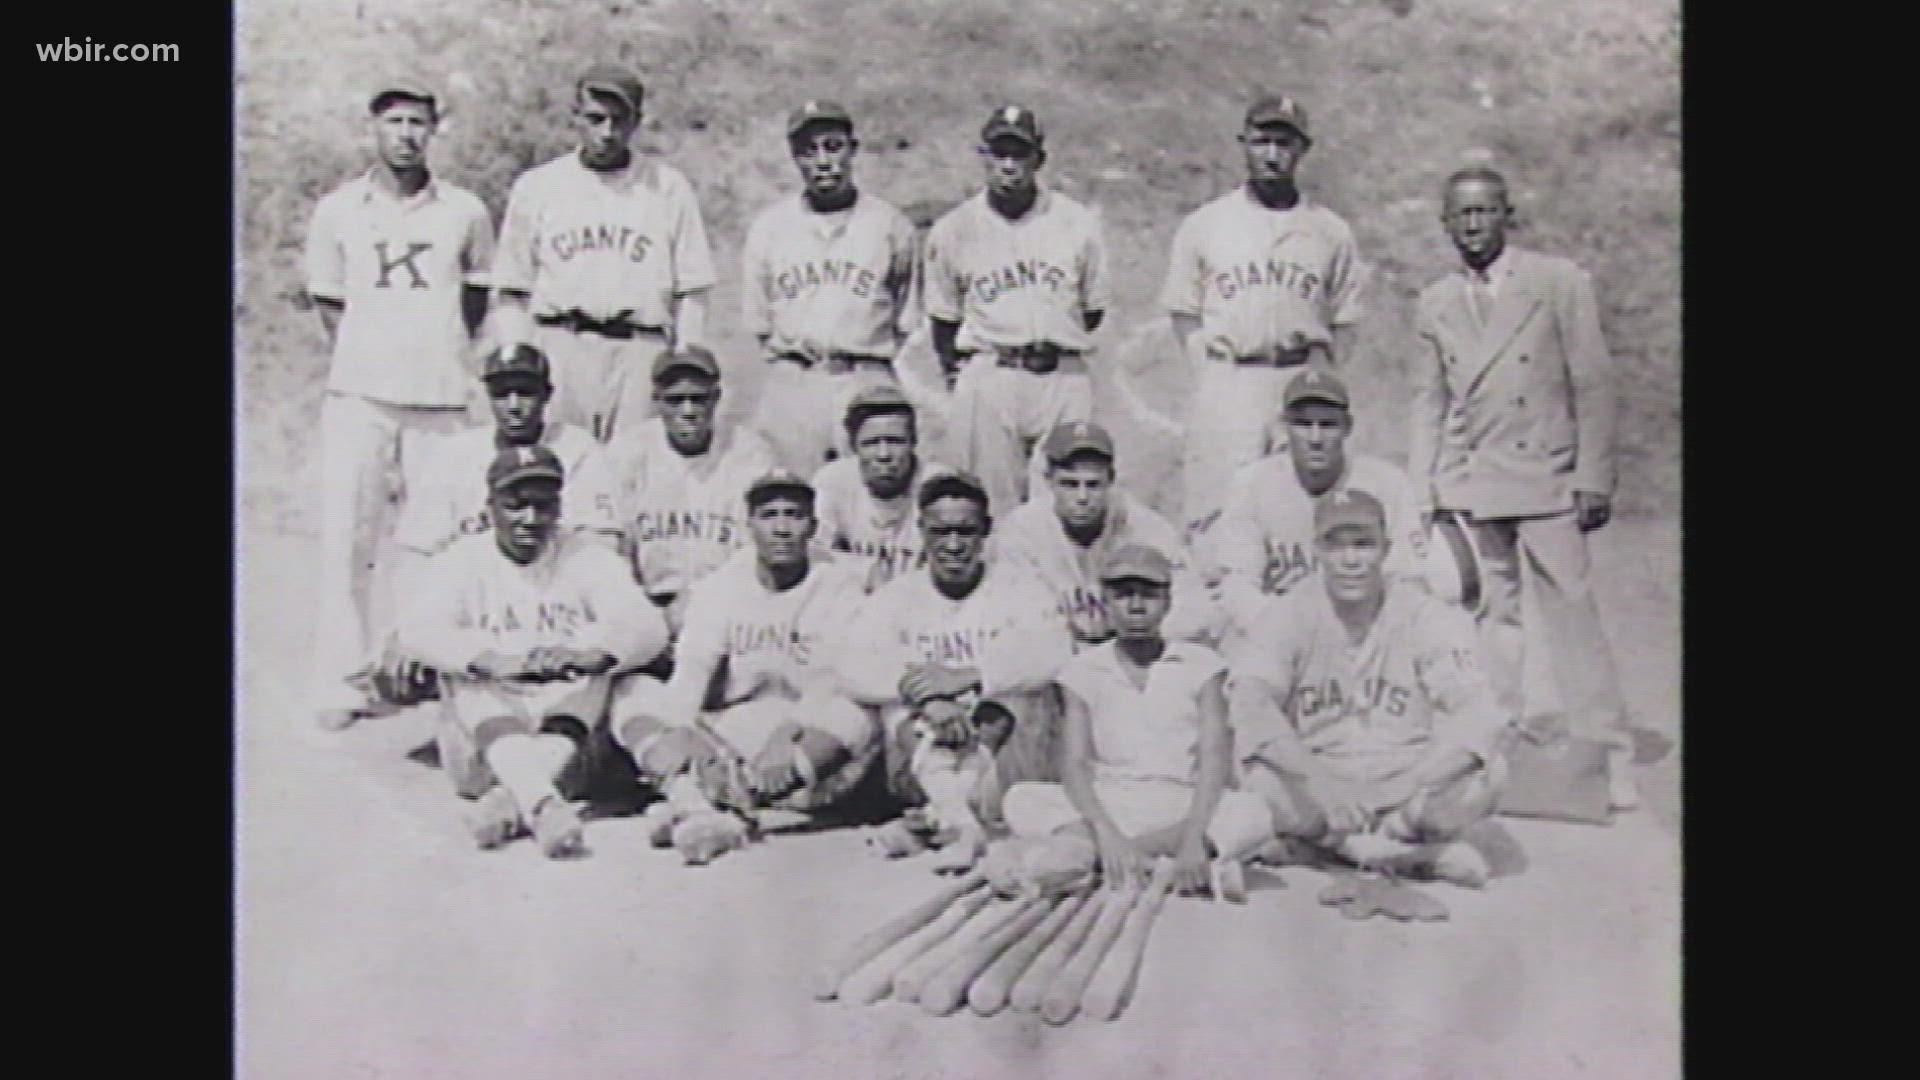 Before Jackie Robinson broke the Major League Baseball color barrier, Black athletes started the Negro Leagues, and Knoxville’s team was swinging for the fences.